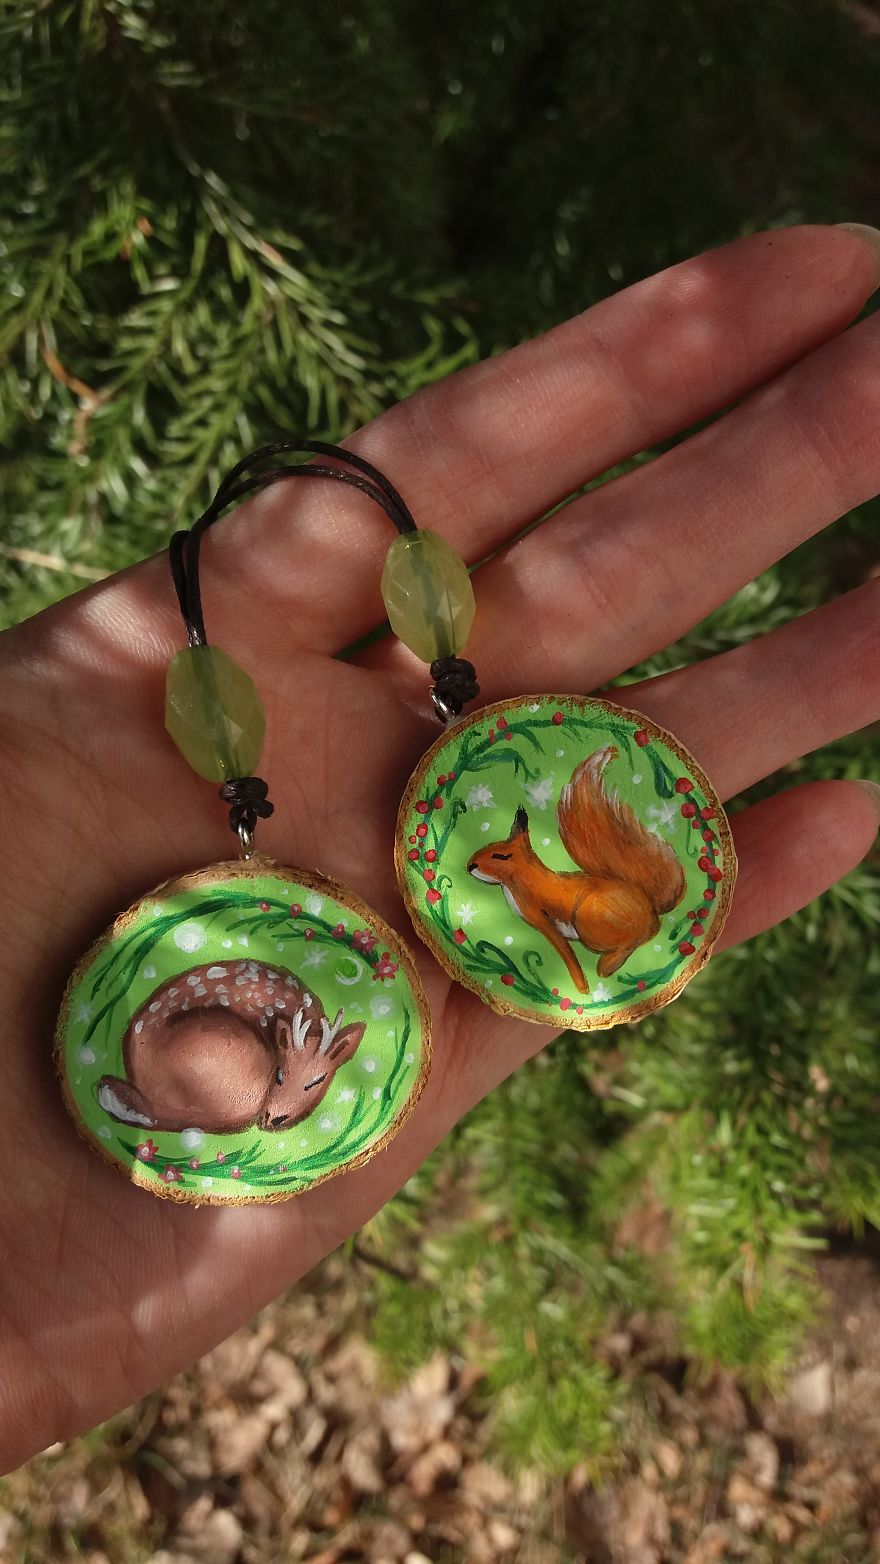 I Create Magical Natural Jewelry From Recycled Branches And Wood Pieces Found In The Woods.